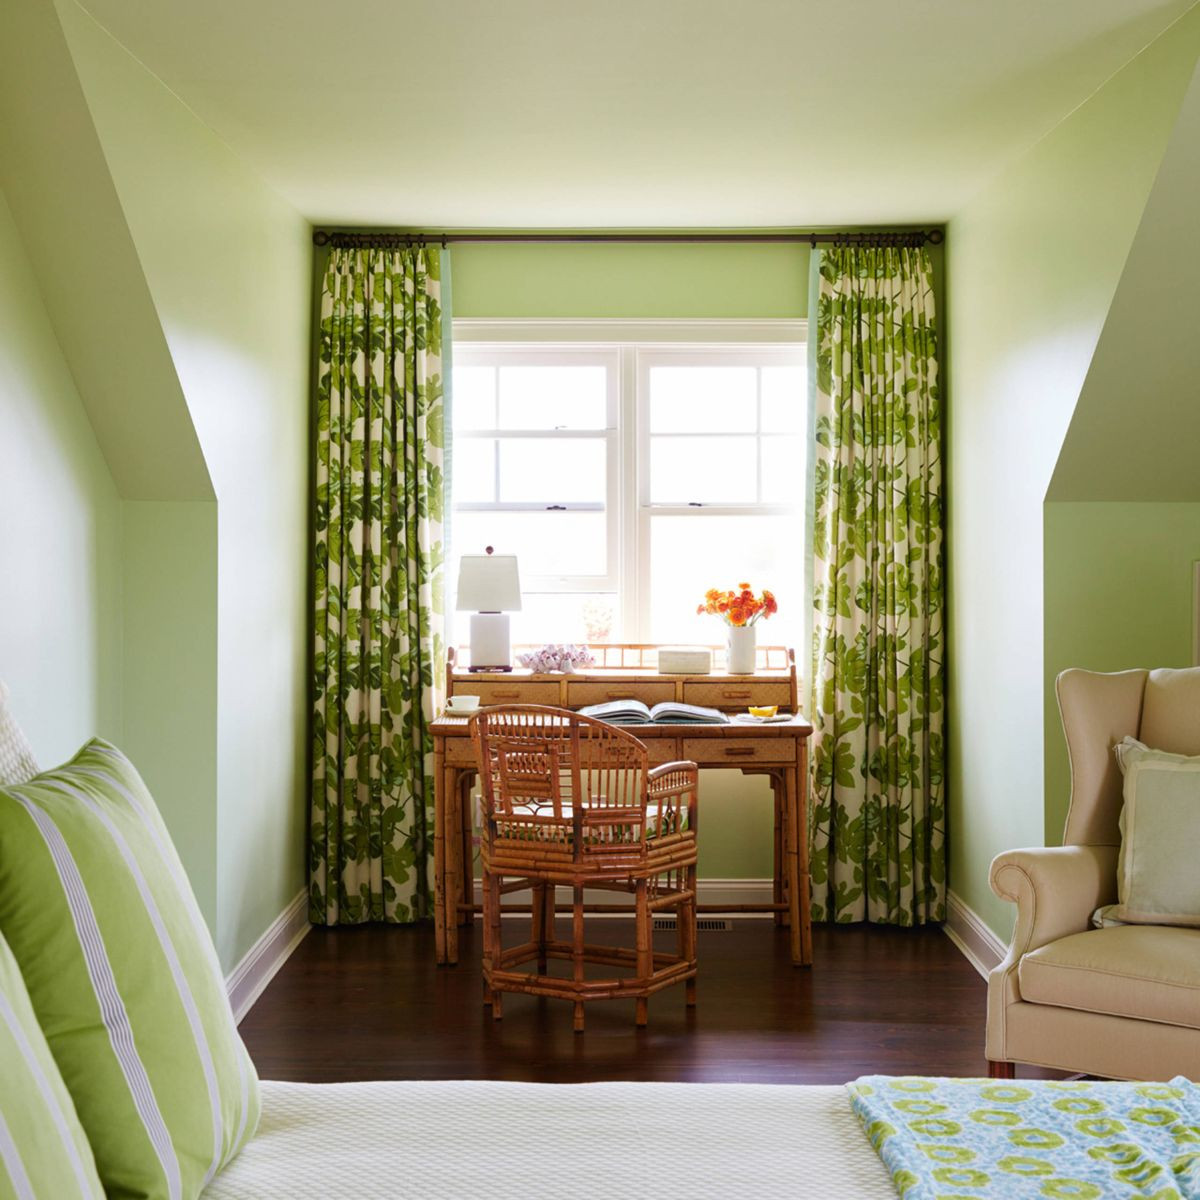 Paint Colors For The Bedroom
 The Four Best Paint Colors For Bedrooms